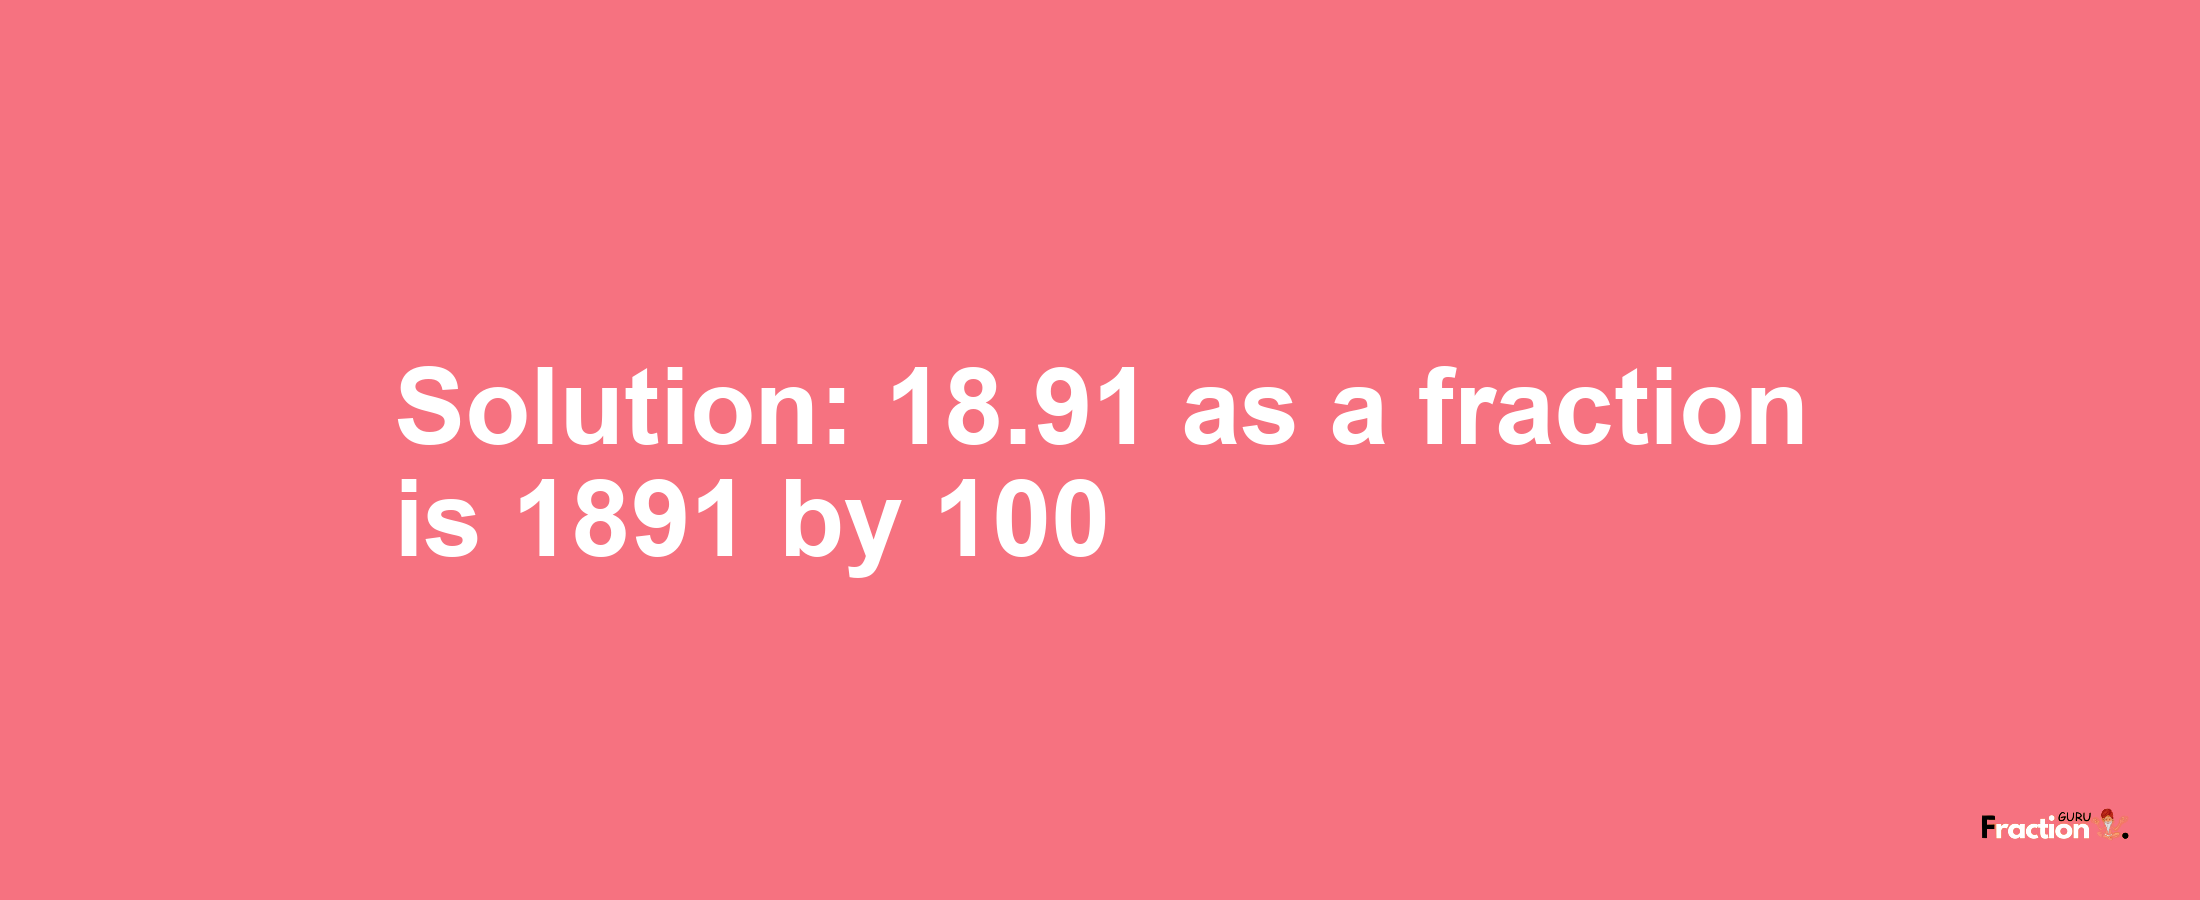 Solution:18.91 as a fraction is 1891/100